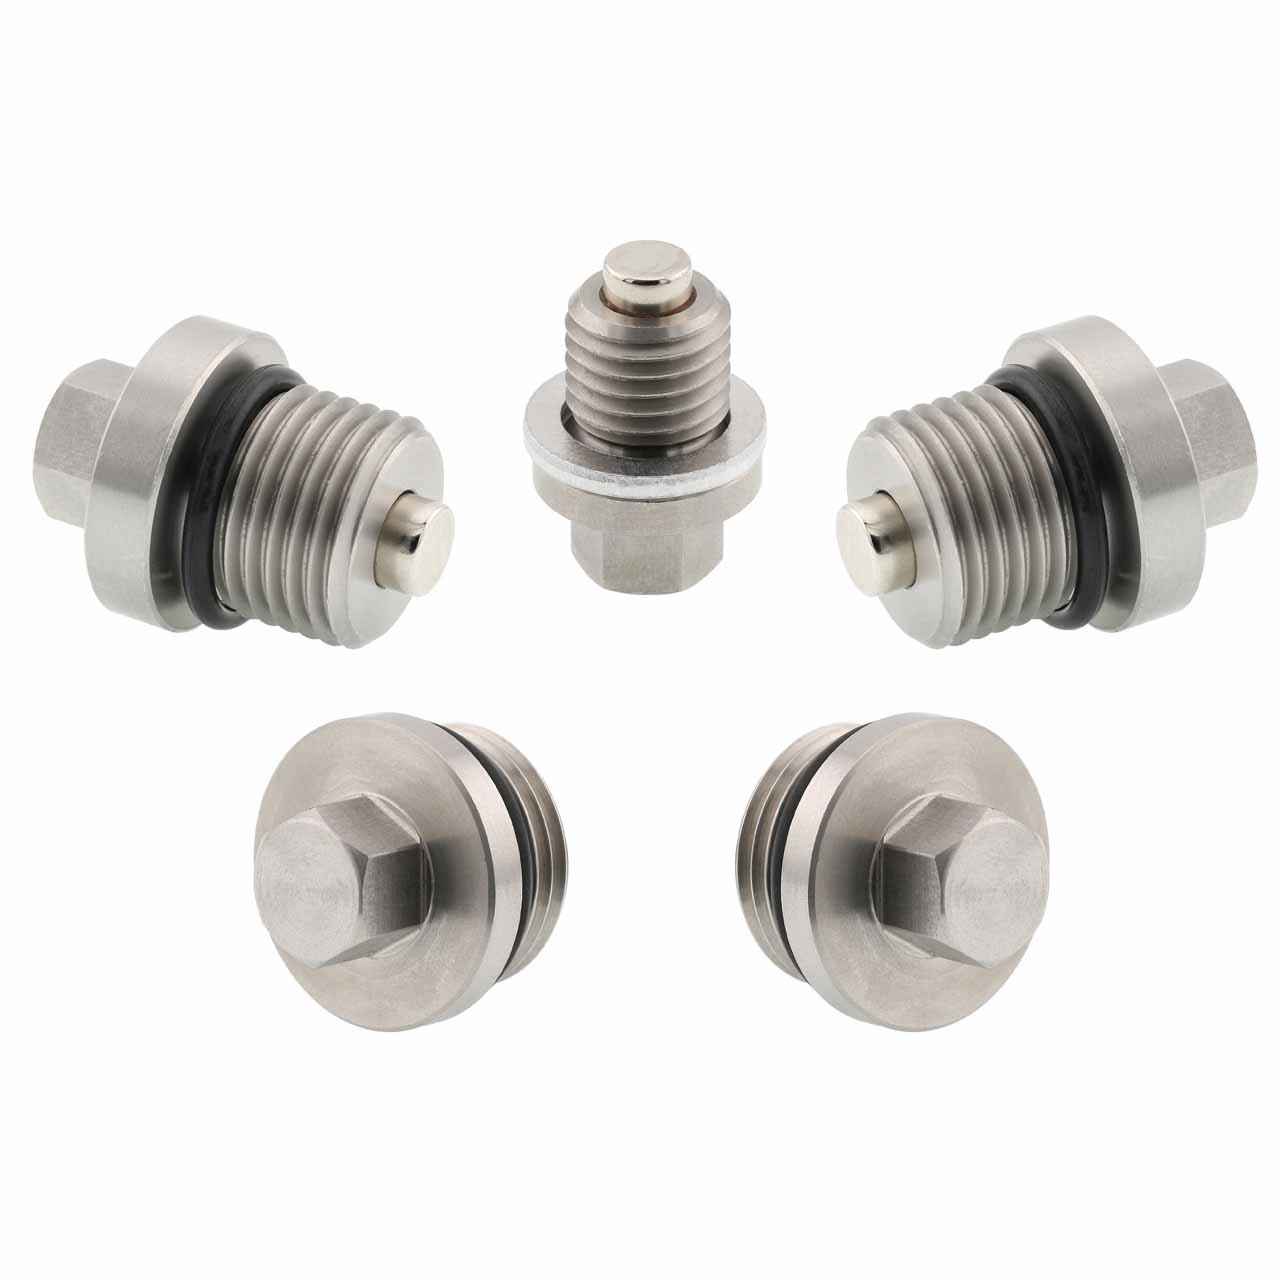 Polaris RZR Trail S 900 Sport Magnetic Oil Drain Plug Kit - 2022-2023 - Engine, Transmission, Differential - Made In USA